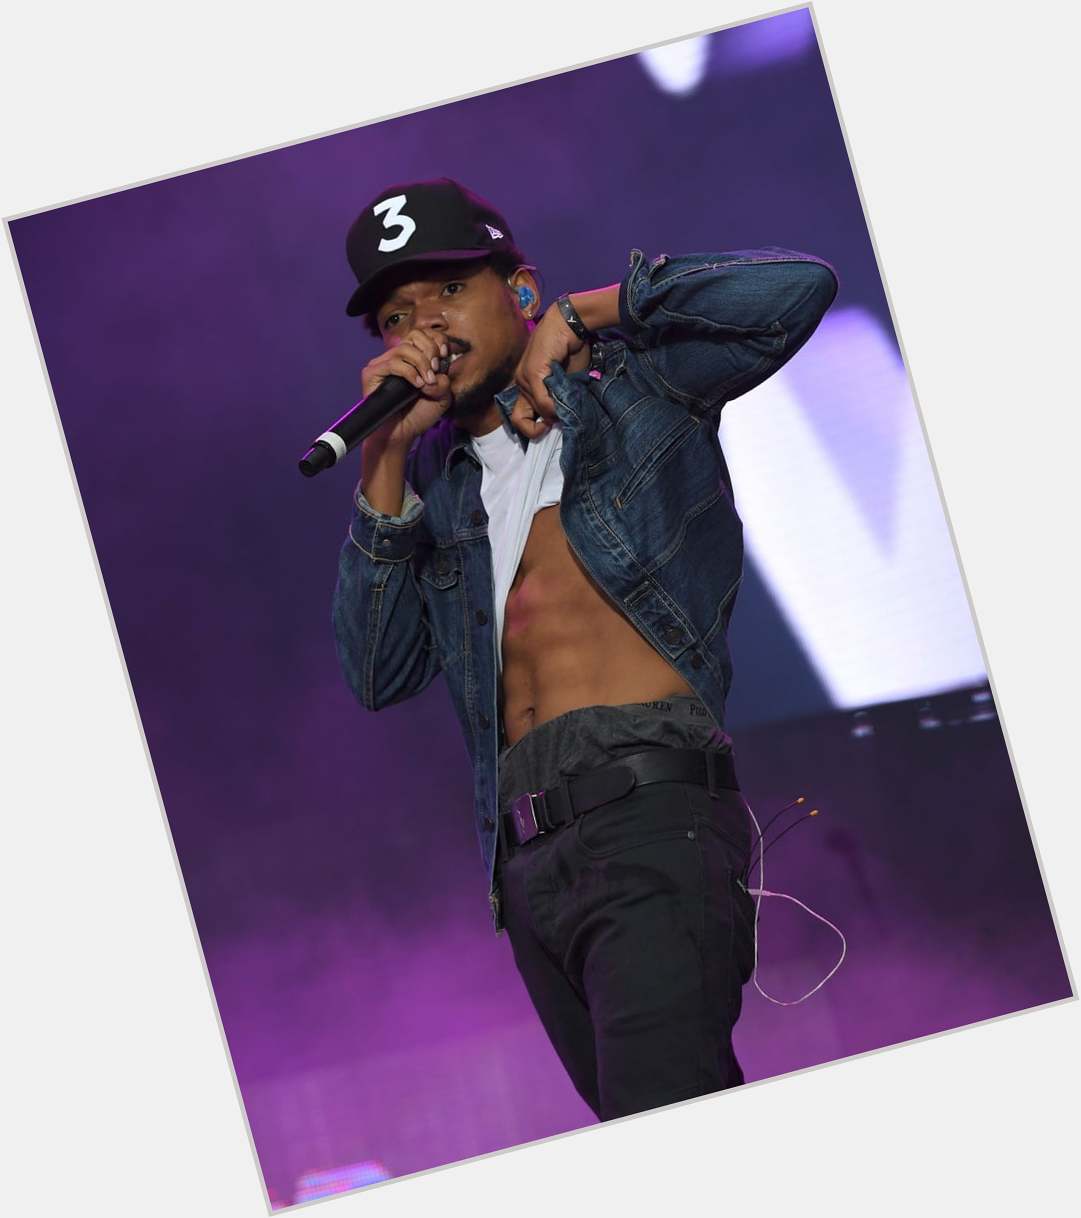 <a href="/hot-men/chance-the-rapper/where-dating-news-photos">Chance The Rapper</a> Average body,  black hair & hairstyles